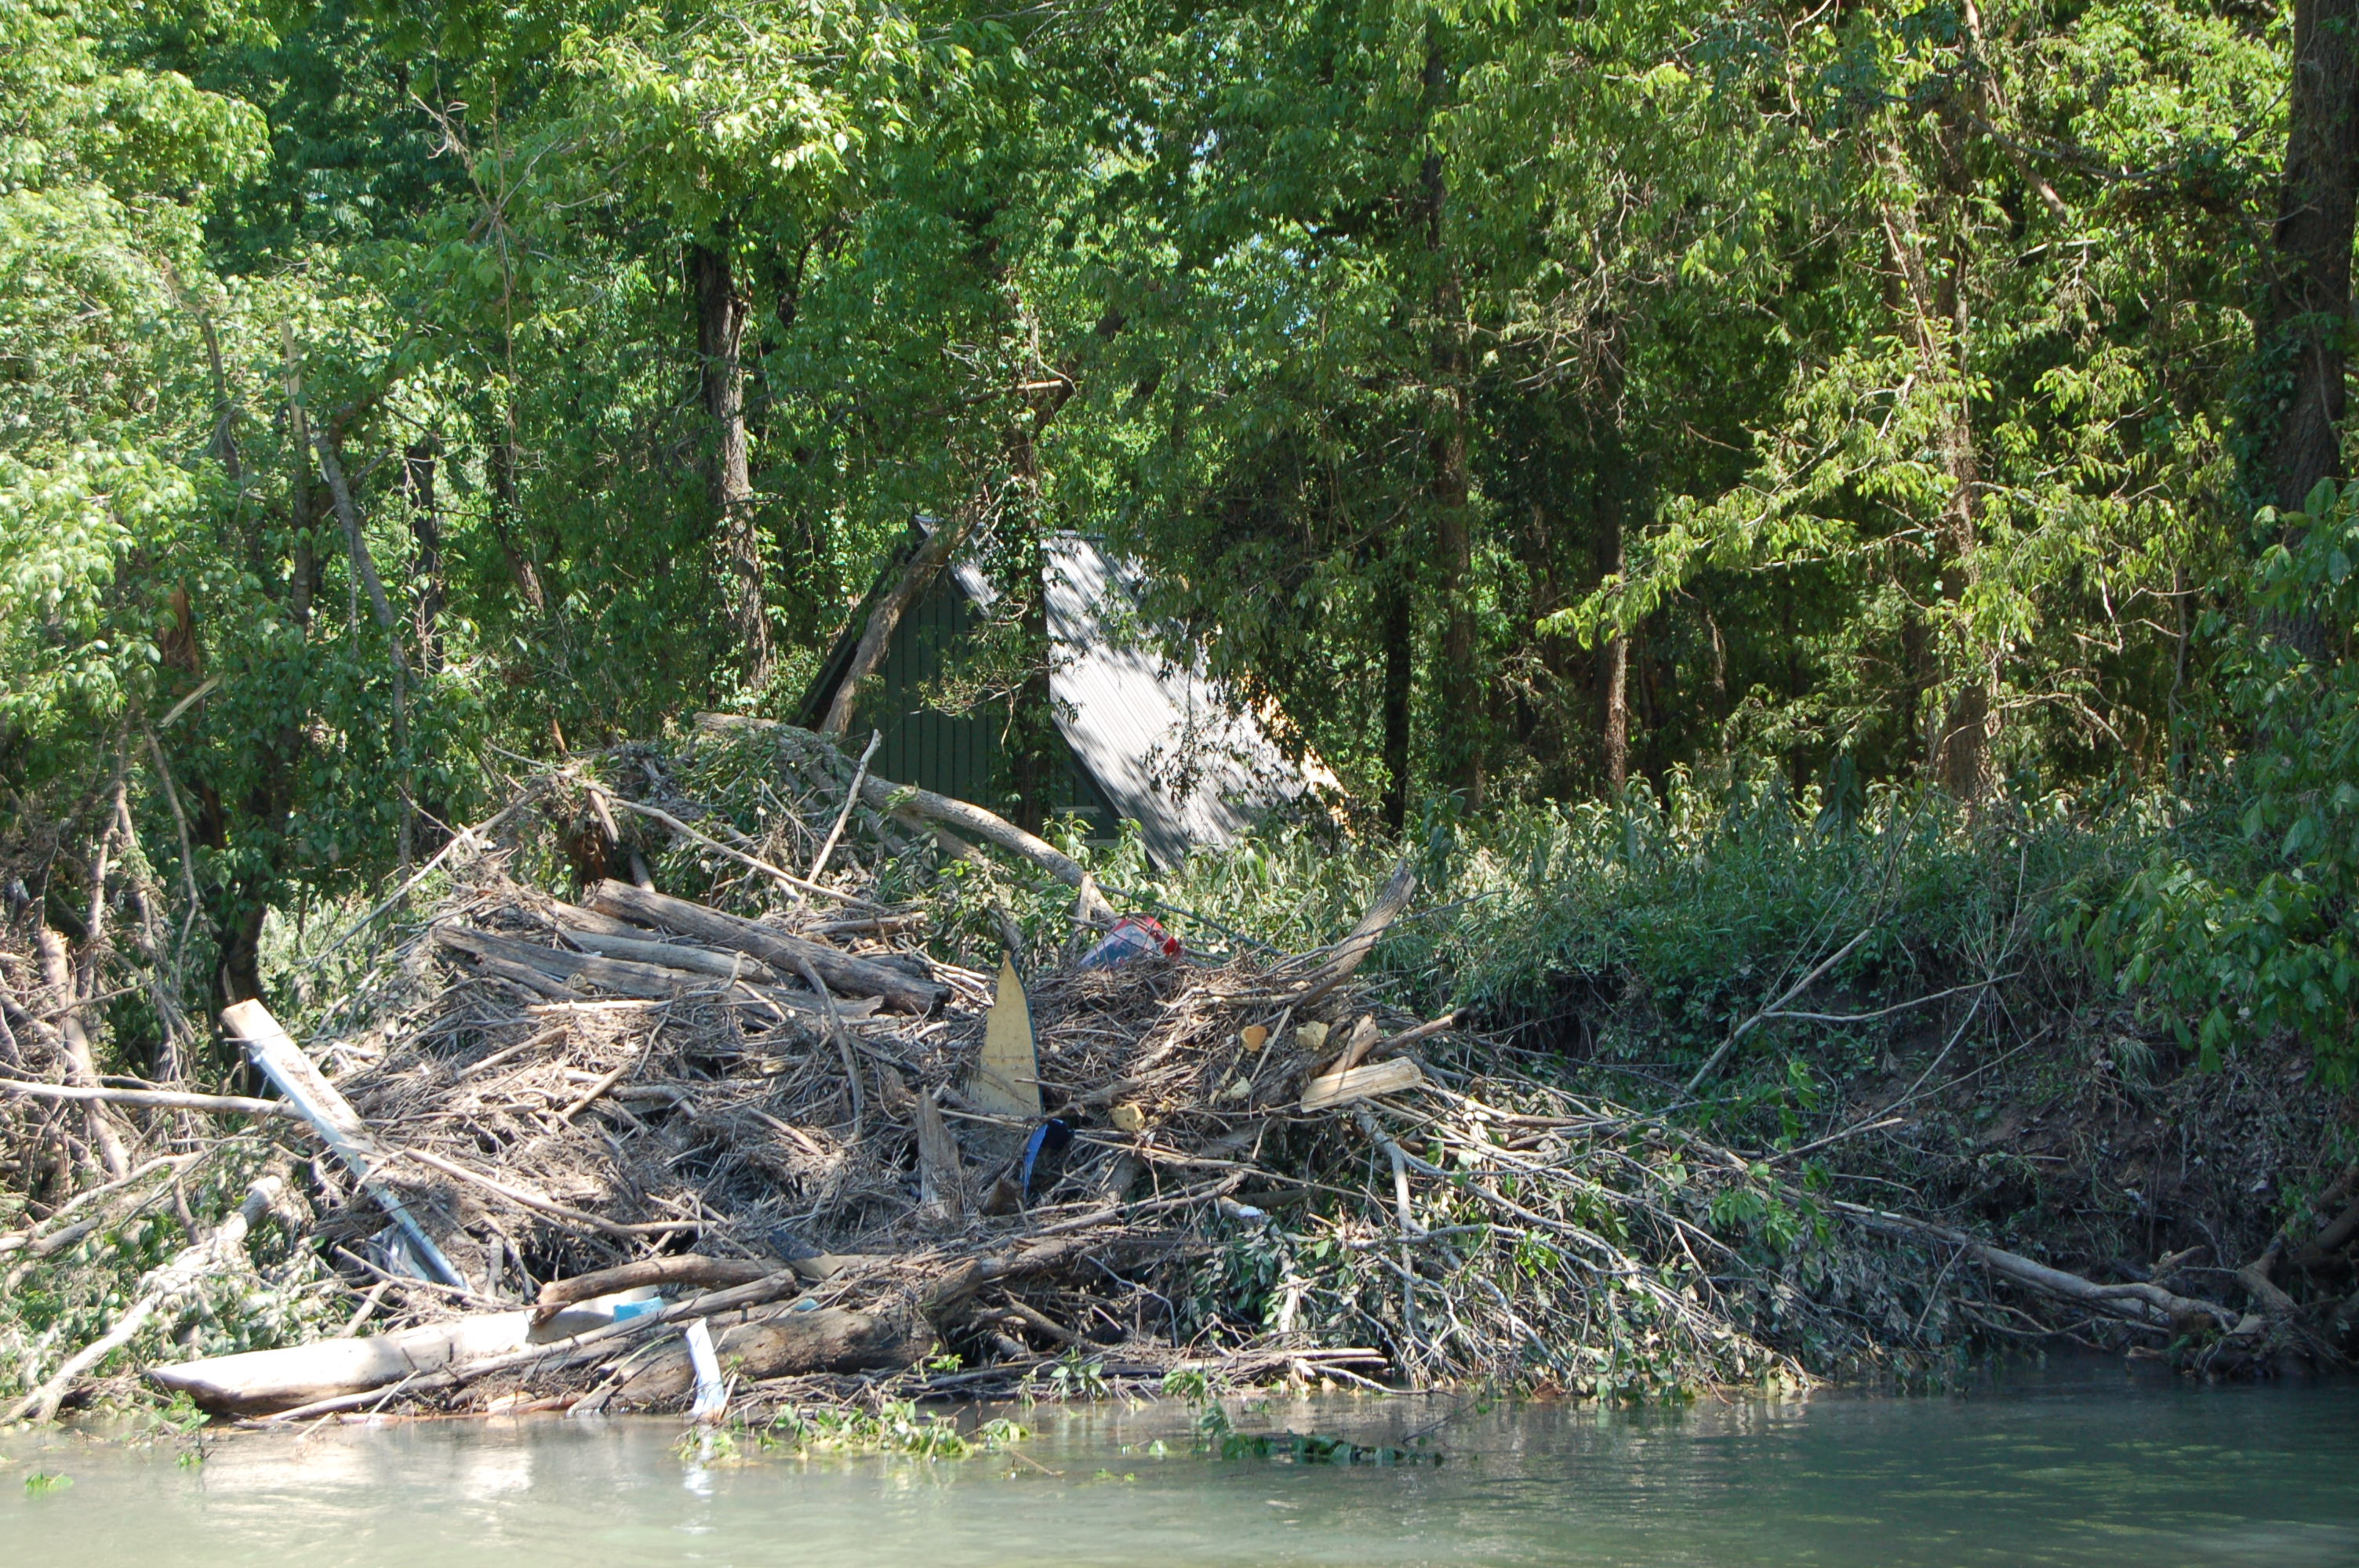 flood debris in river piled up next to water